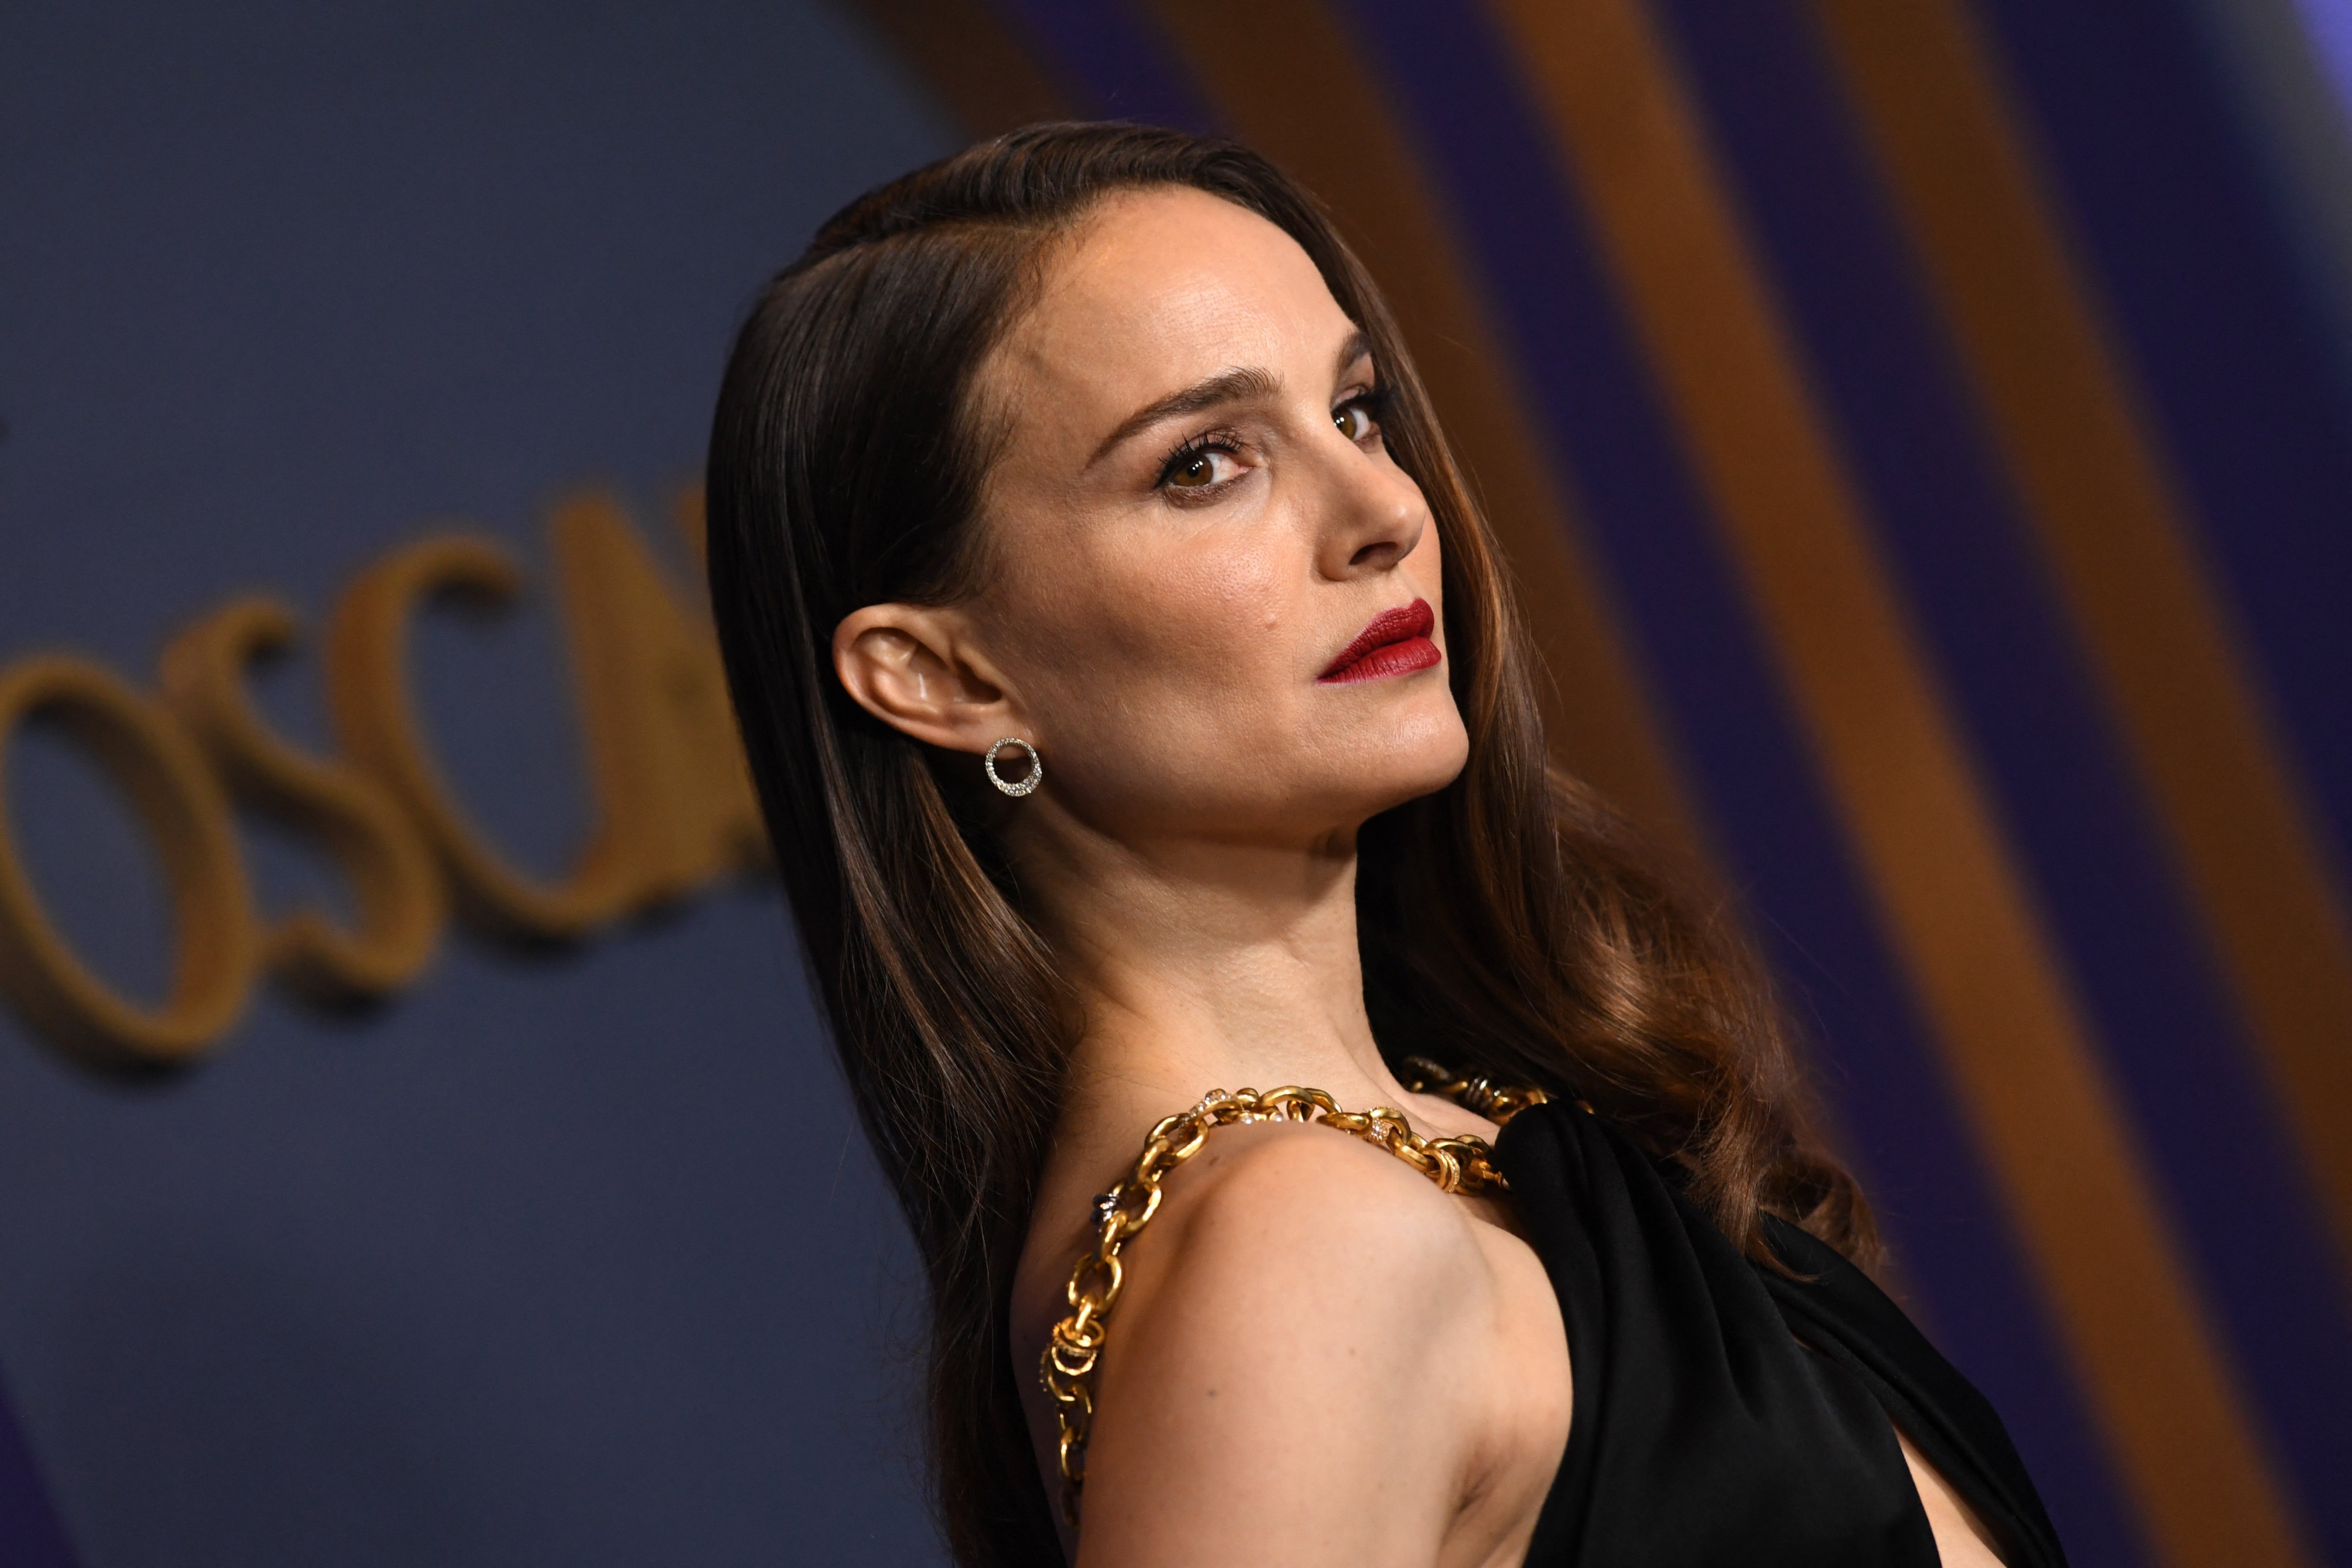 Natalie Portman says that method acting is ‘a luxury women can’t afford’